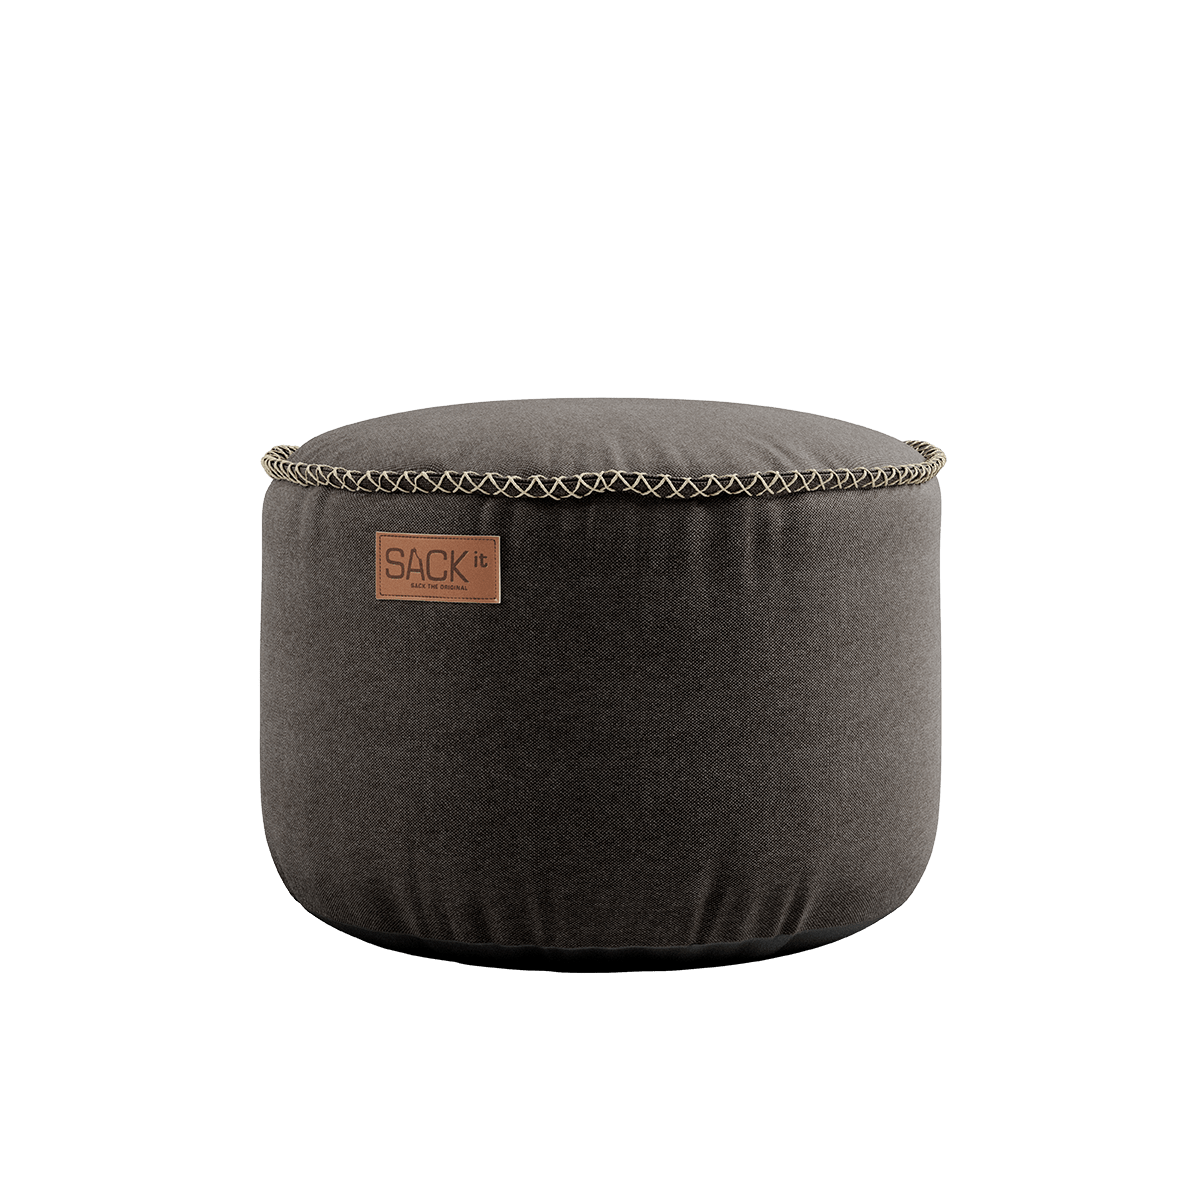 variant_8572001% | Canvas Pouf [Contract] - Canvas Brown | SACKit